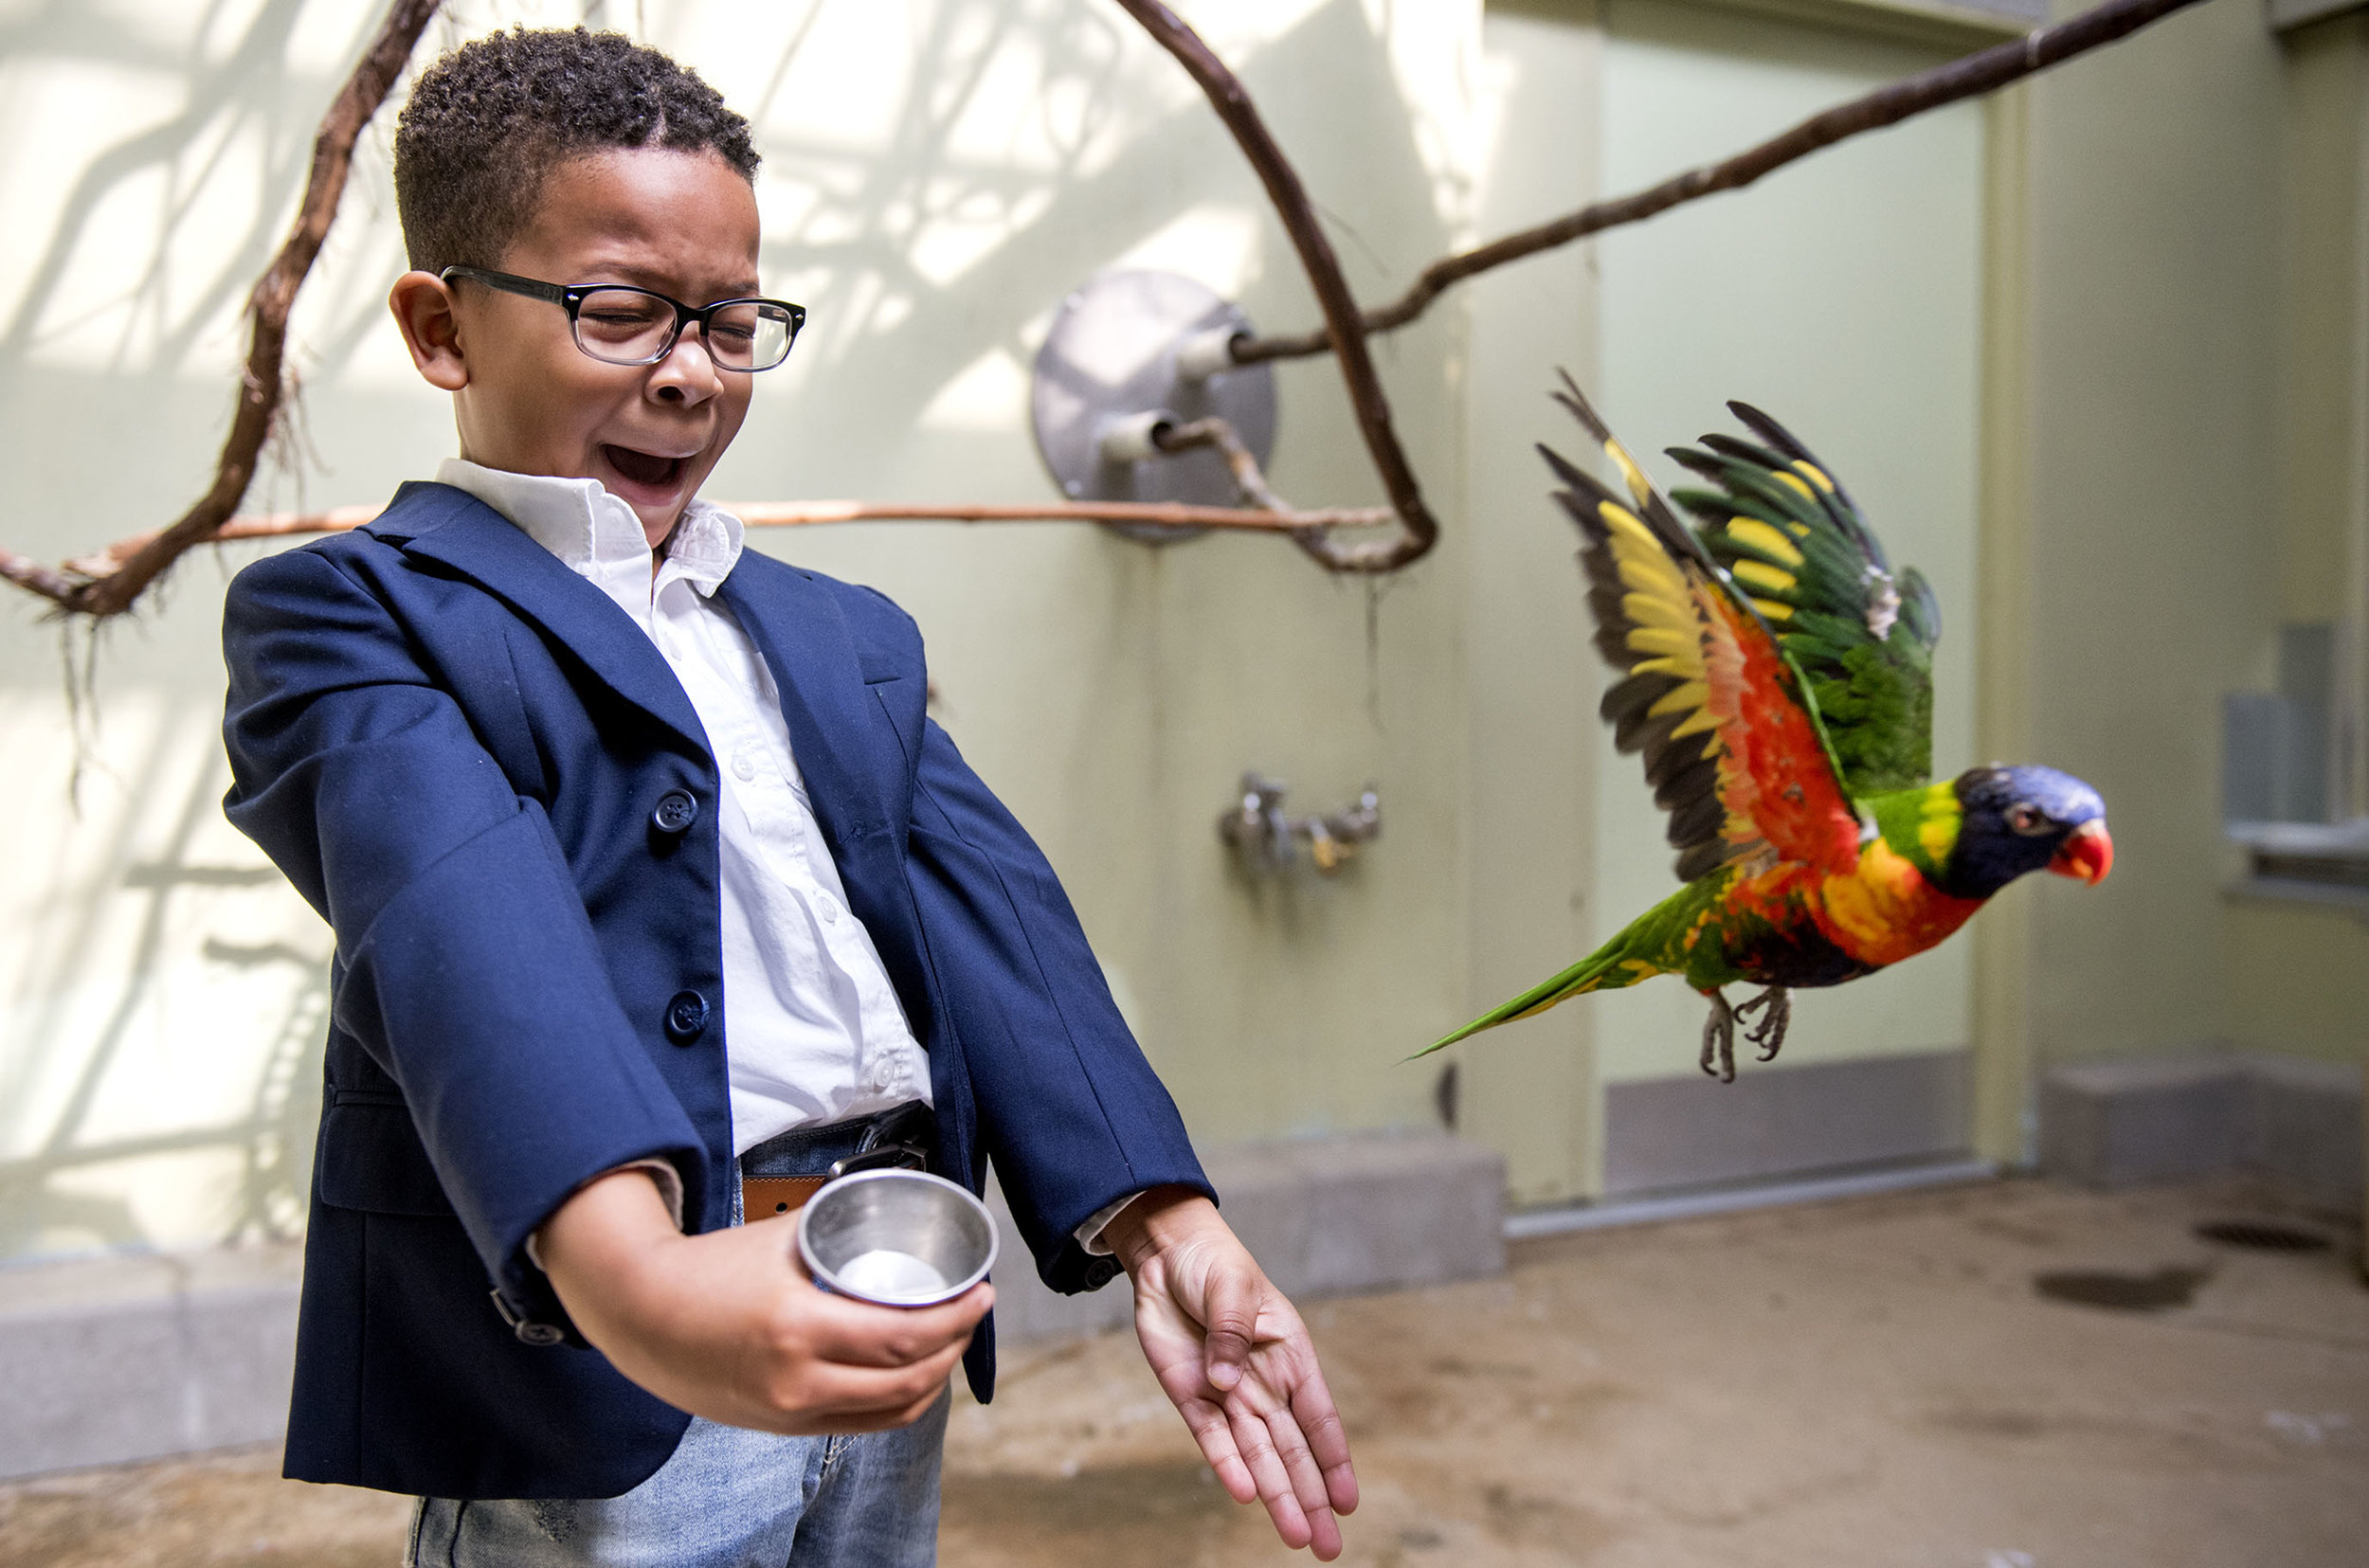  David Morgan, 5, of McKeesport, screams as a rainbow lorikeet flies away from him after trying to gain confidence to feed the bird on Sunday, April 1, 2018 at the National Aviary in North Side. 